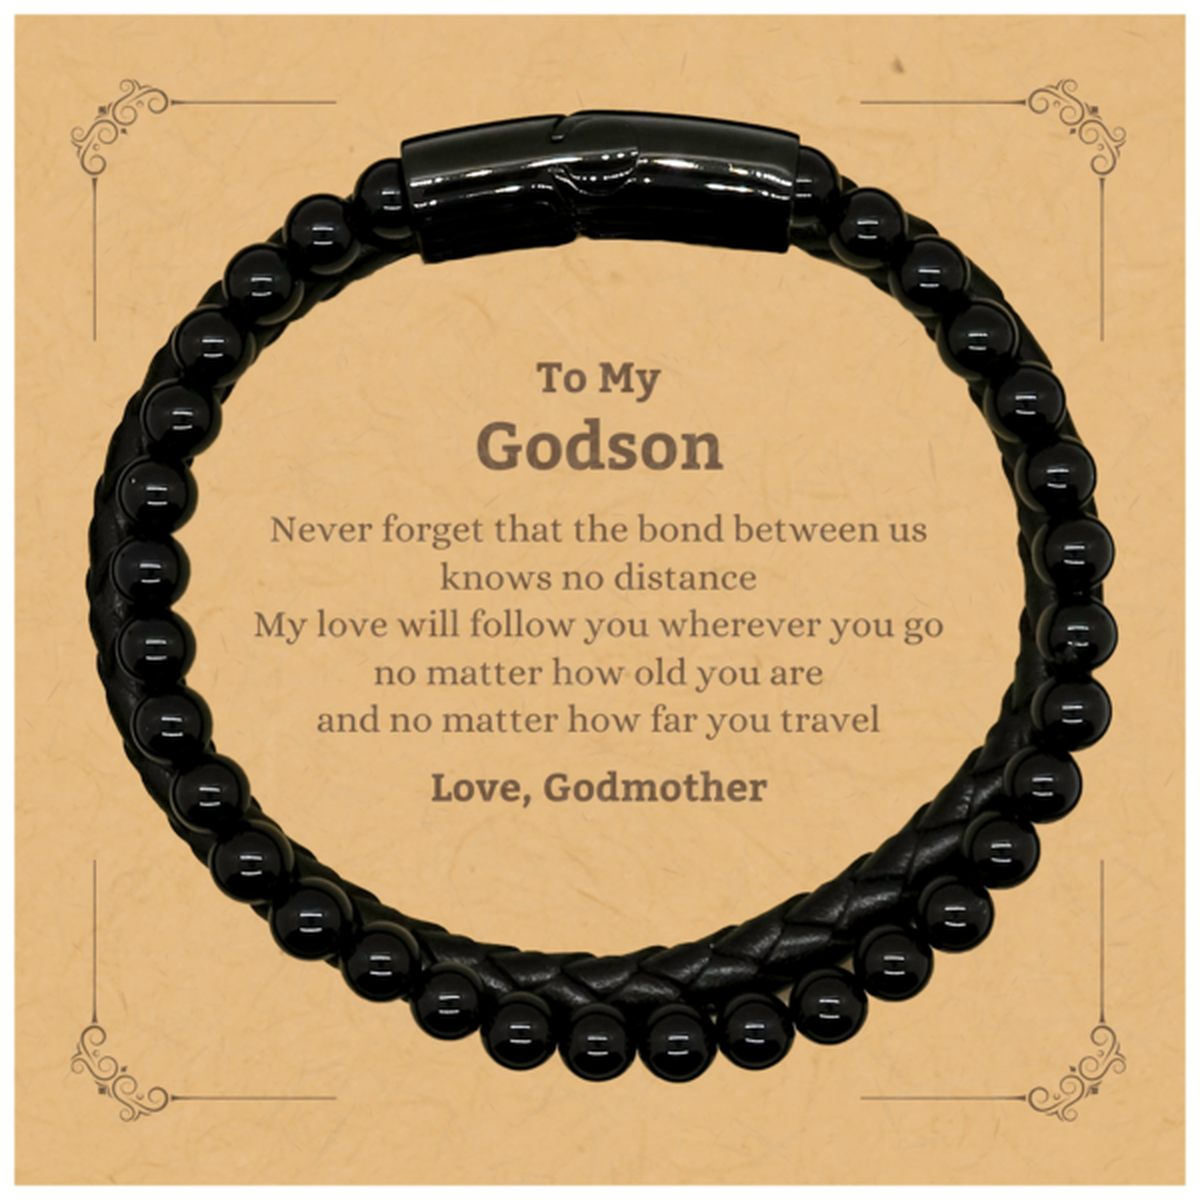 Godson Birthday Gifts from Godmother, Adjustable Stone Leather Bracelets for Godson Christmas Graduation Unique Gifts Godson Never forget that the bond between us knows no distance. Love, Godmother